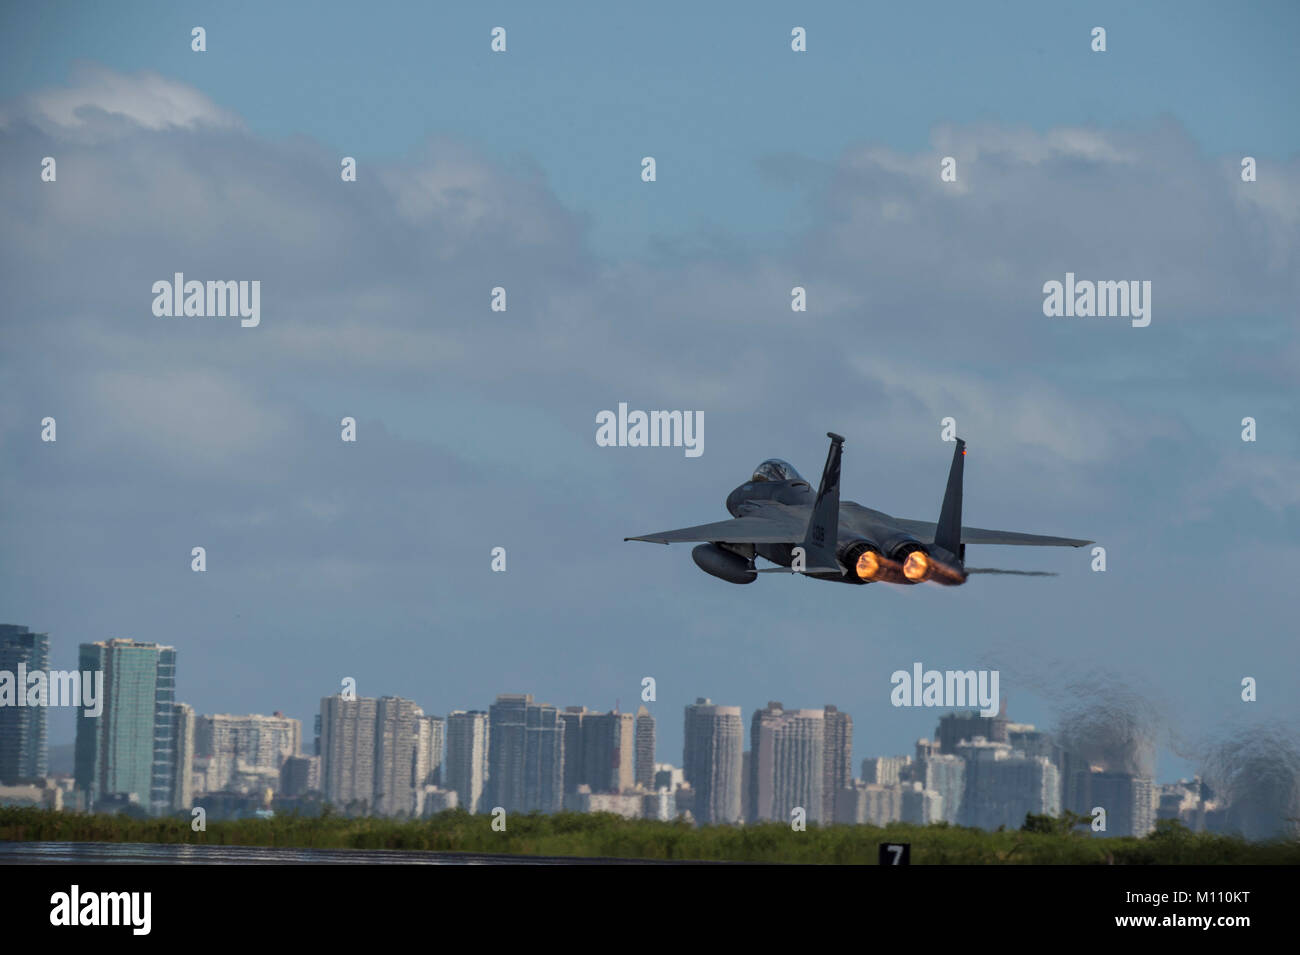 U.S. Air Force F-15 Eagle from California Air National Guard’s 144th Fighter Wing takes flight over the city of Honolulu during Sentry Aloha 18-01 Jan. 22, 2018 at Joint Base Pearl Harbor-Hickam, Hawaii. Sentry Aloha provides the Air National Guard, U.S. Air Force and DoD counterparts a multi-faceted, joint venue with supporting infrastructure and personnel that incorporates current, realistic integrated training. (Air National Guard photo by Senior Master Sgt. Chris Drudge) Stock Photo